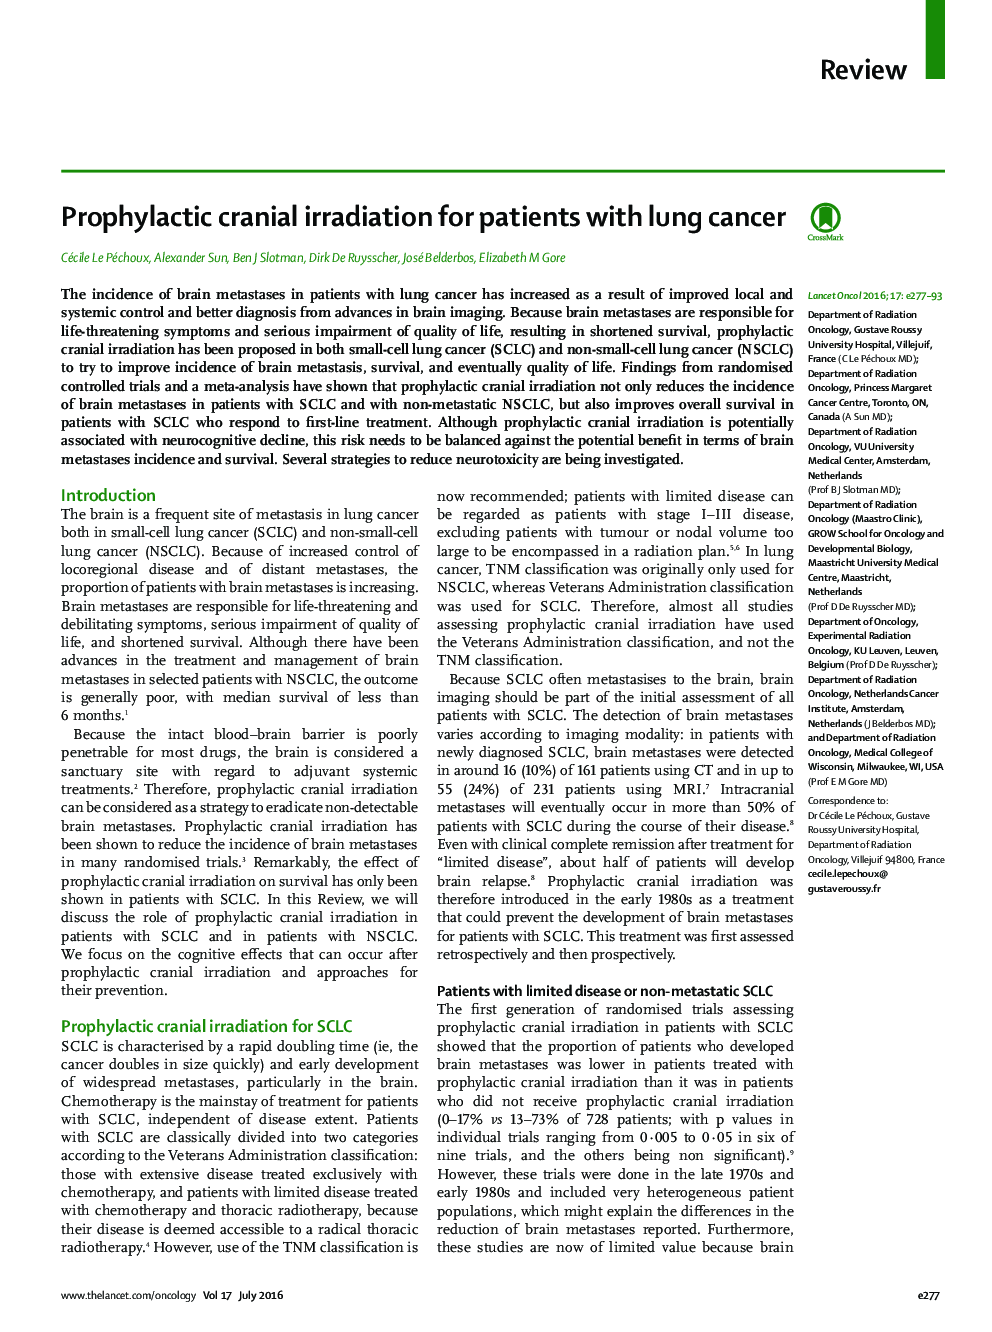 Prophylactic cranial irradiation for patients with lung cancer